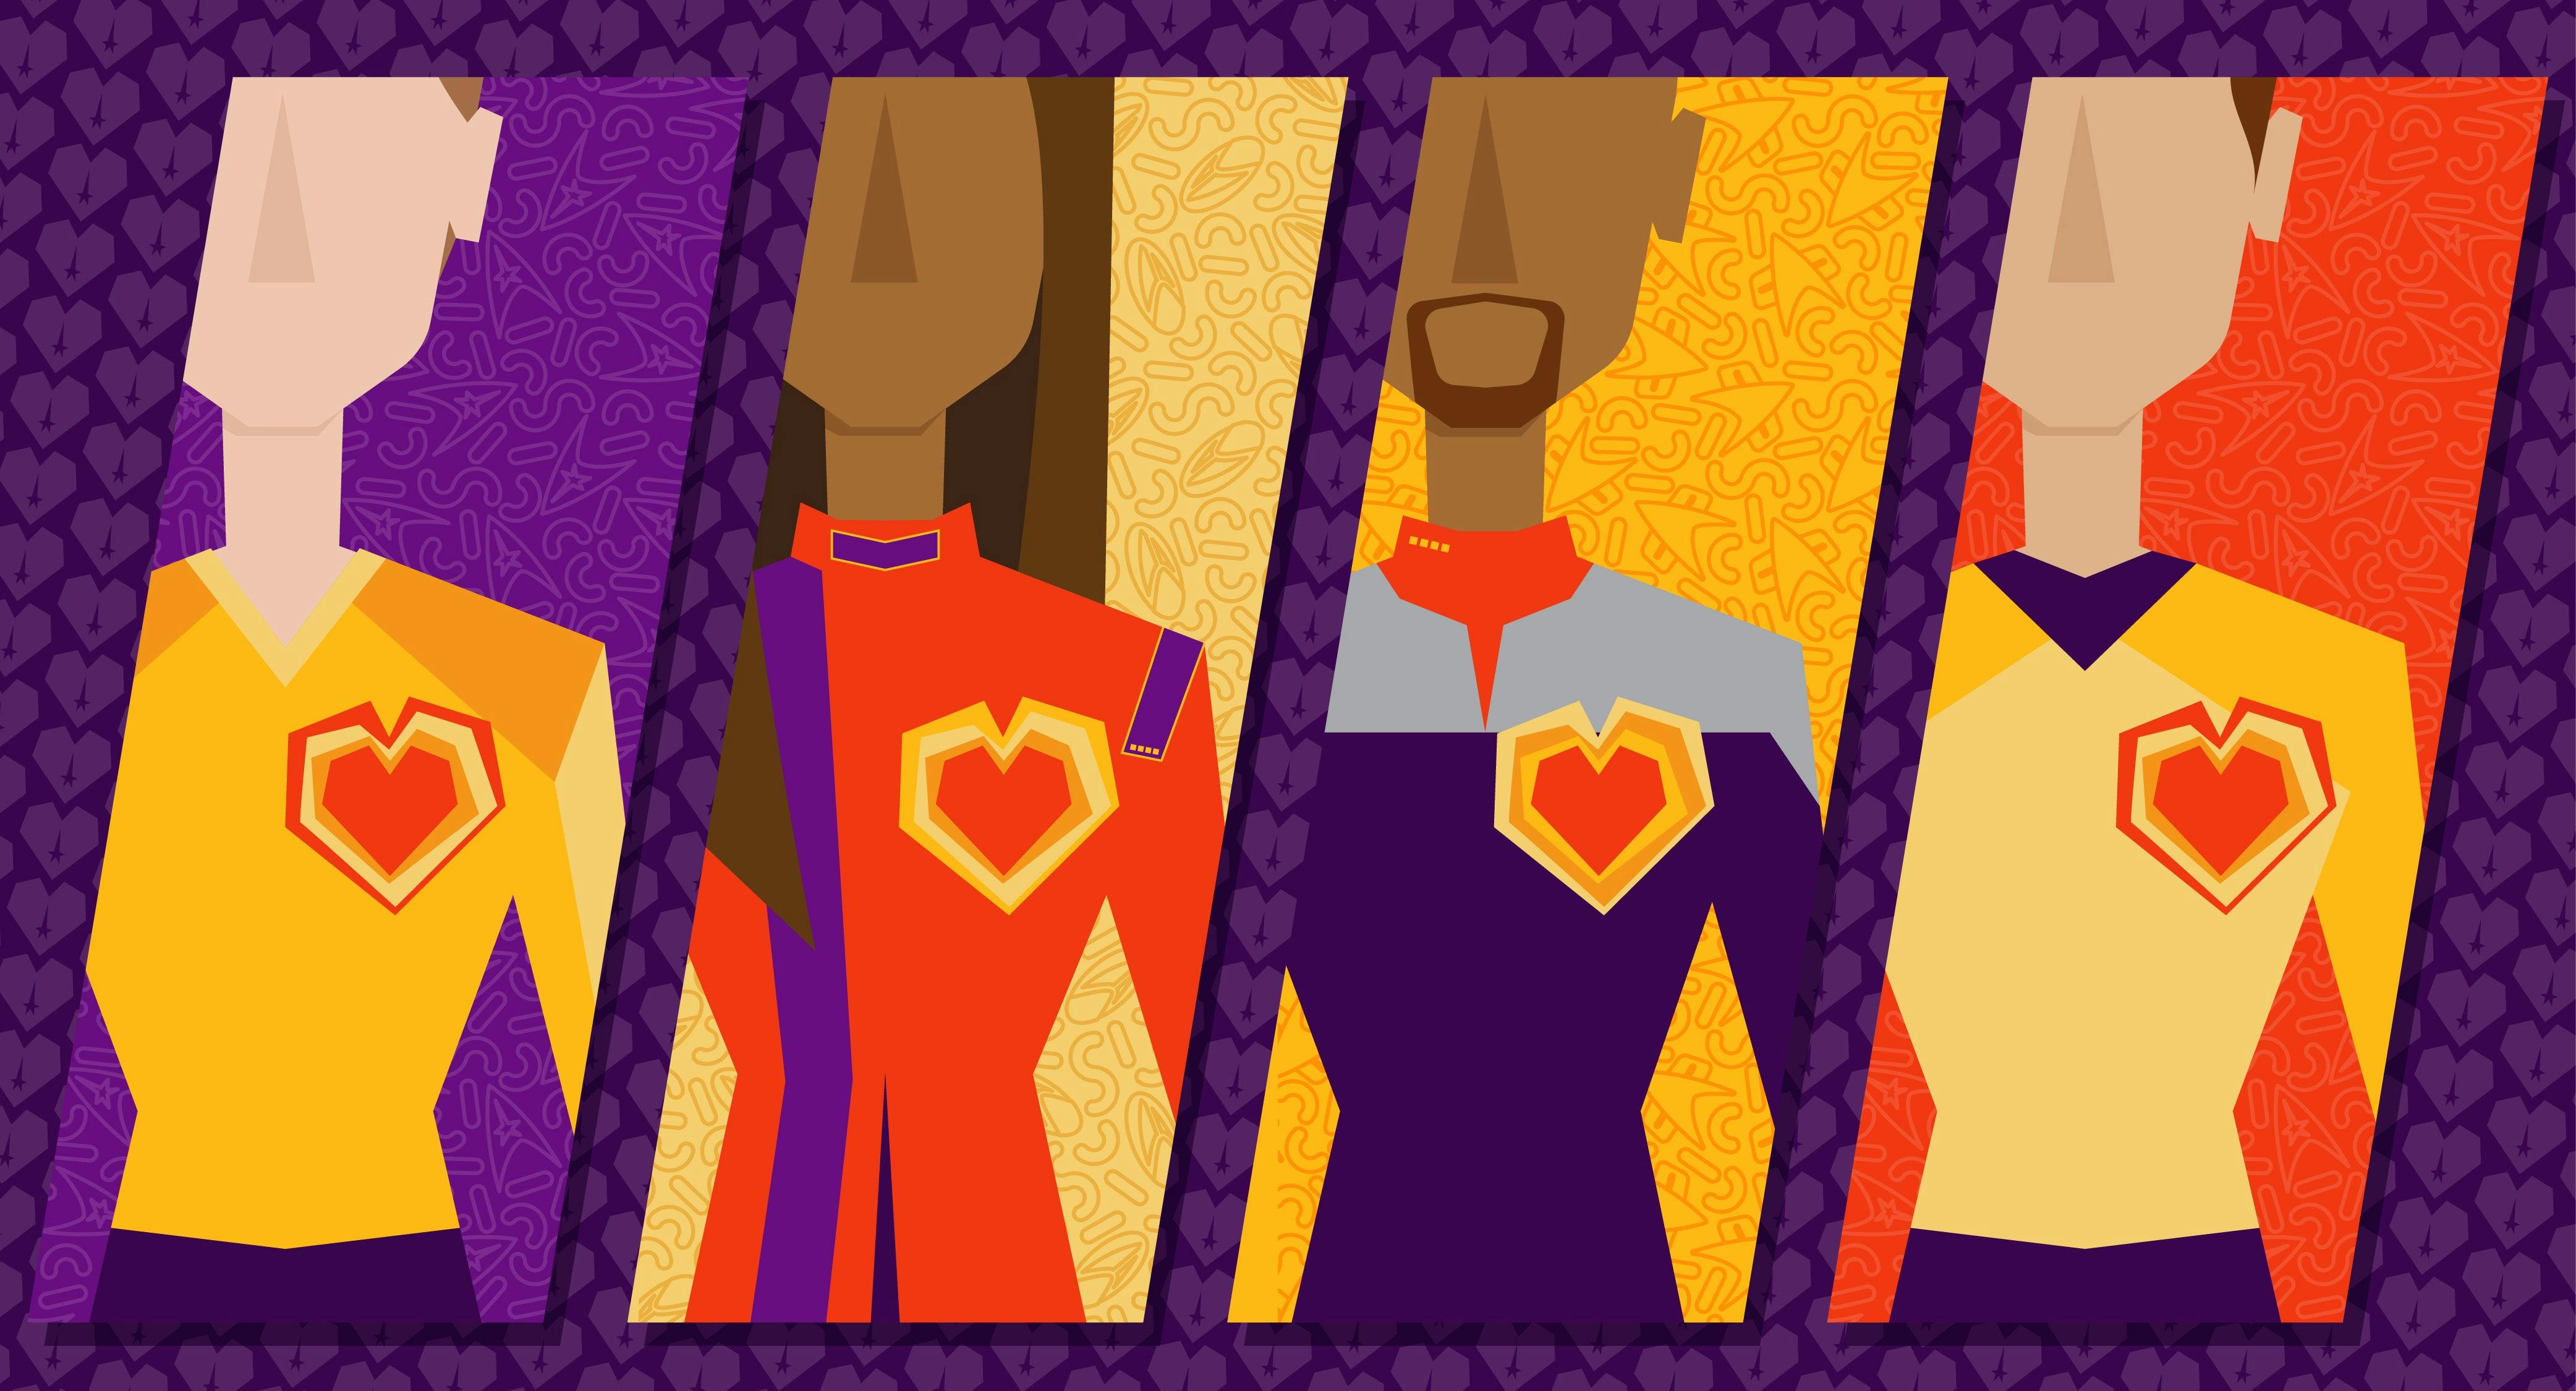 Illustrated versions of Pike, Burnham, Sisko, and Kirk stand in a row. Each captain is wearing their respective uniform, and over their chests there is a heart symbol.